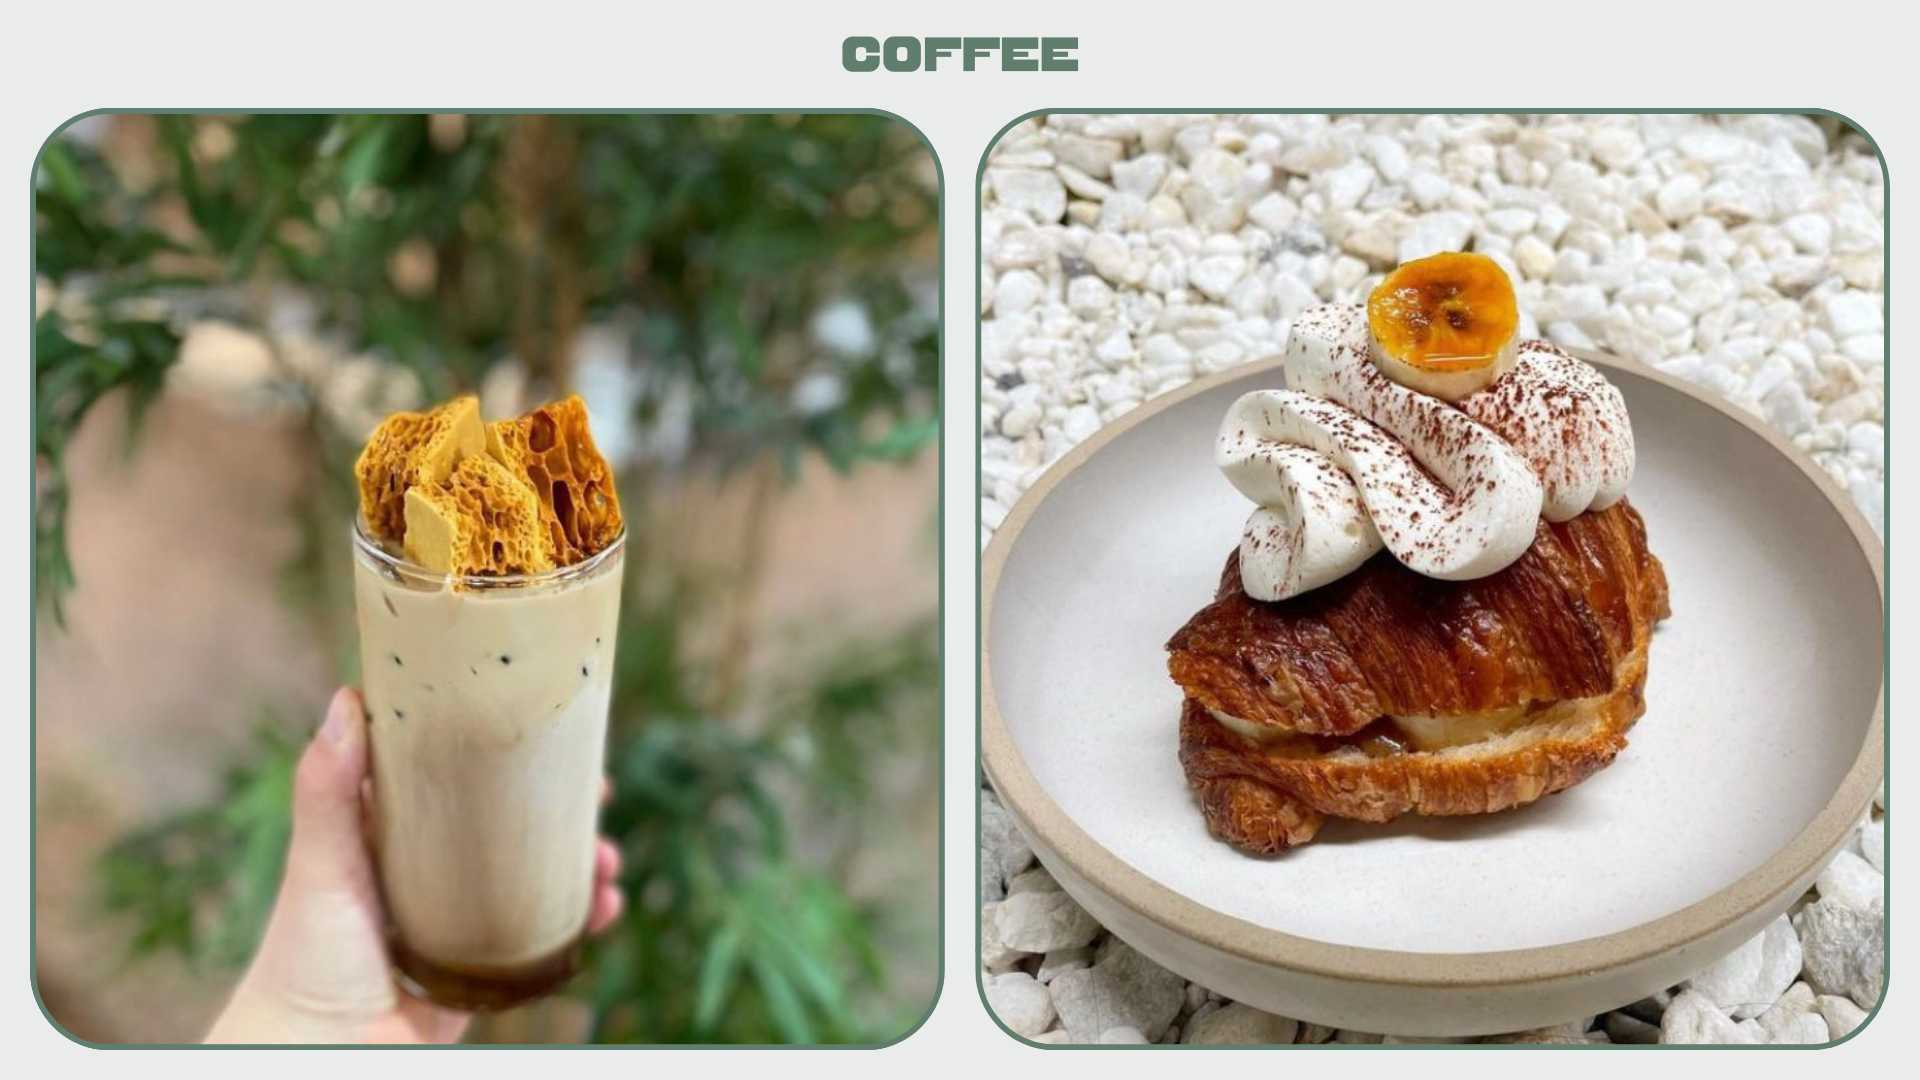 L: Iced coffee topped with honeycomb. R: A croissant topped with cream and banana